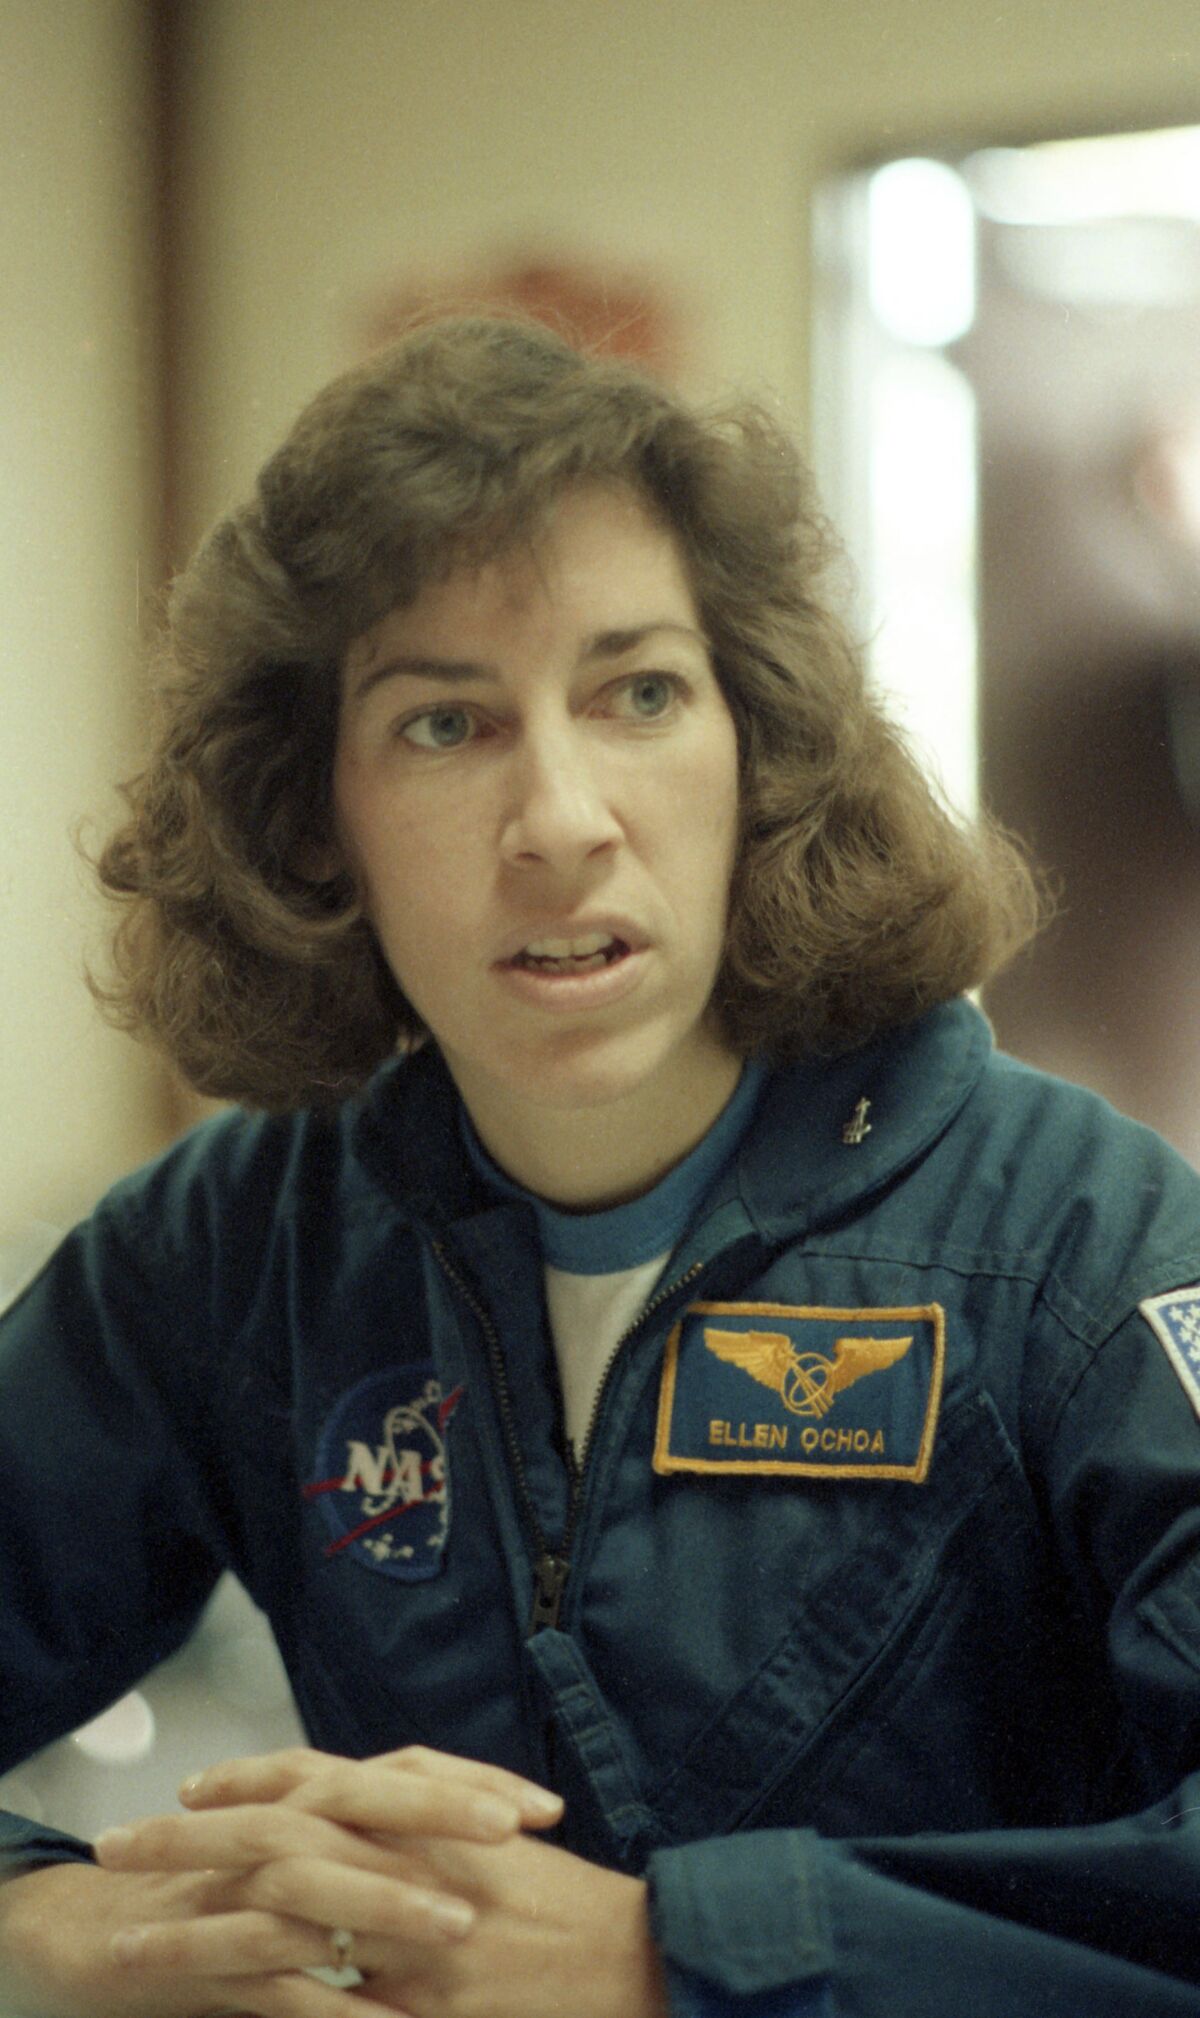 Astronaut Ellen Ochoa, who graduated from Grossmont High School and San Diego State University, earned a master of science degree and a doctorate in electrical engineering from Stanford University. She is shown in a photo taken in January 1992.